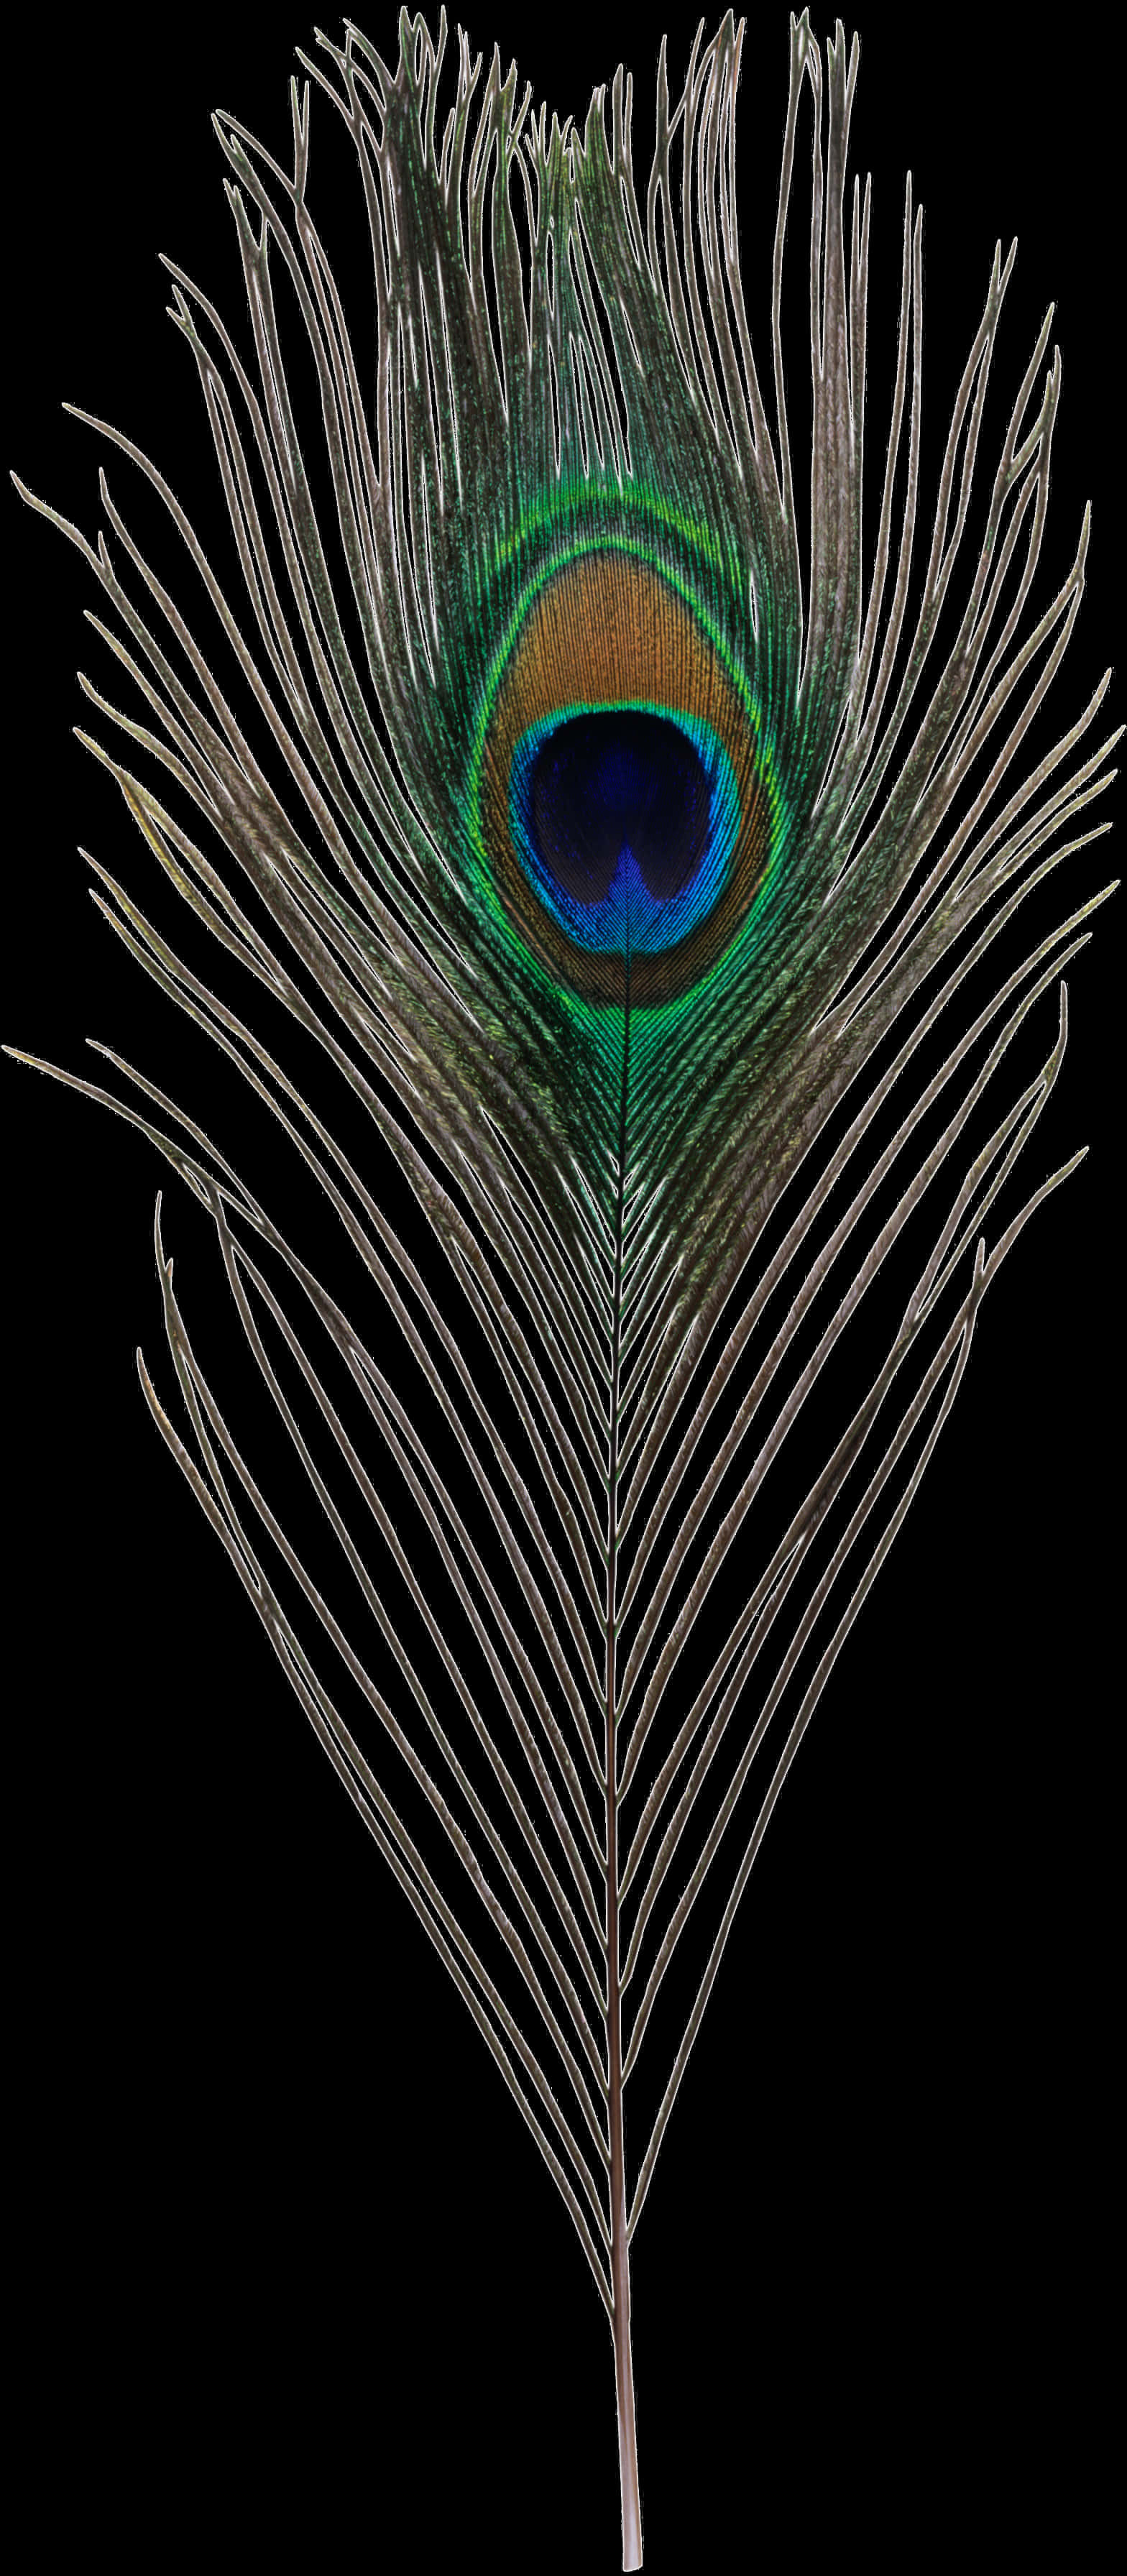 A Close-up Of A Peacock Feather